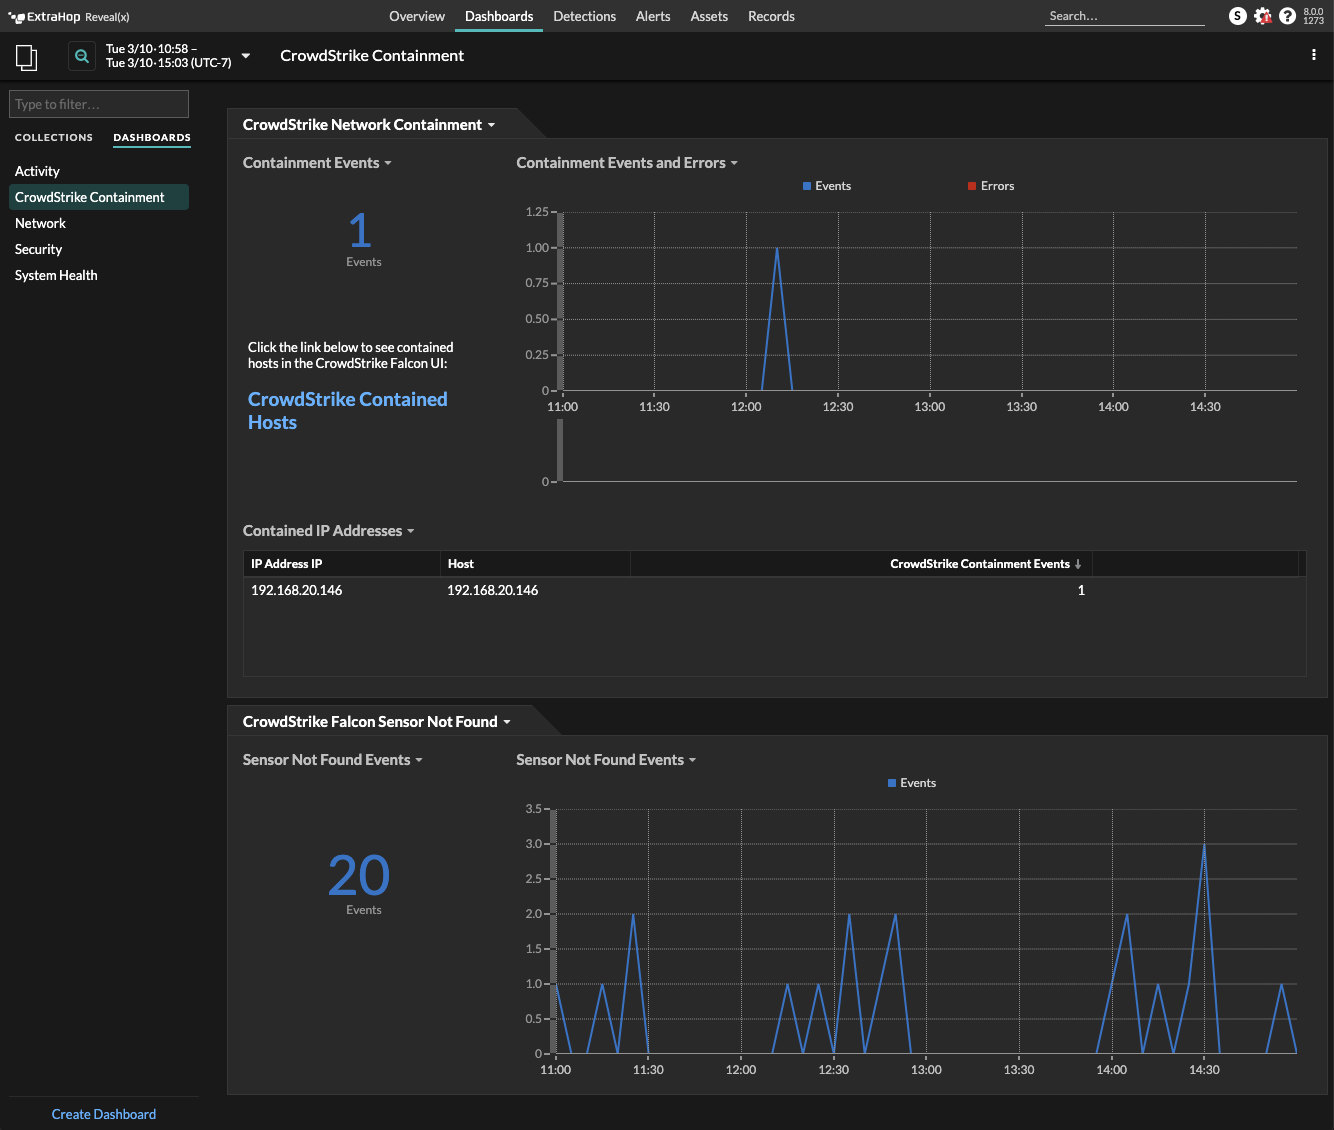 ExtraHop dashboard for CrowdStrike Network Containment